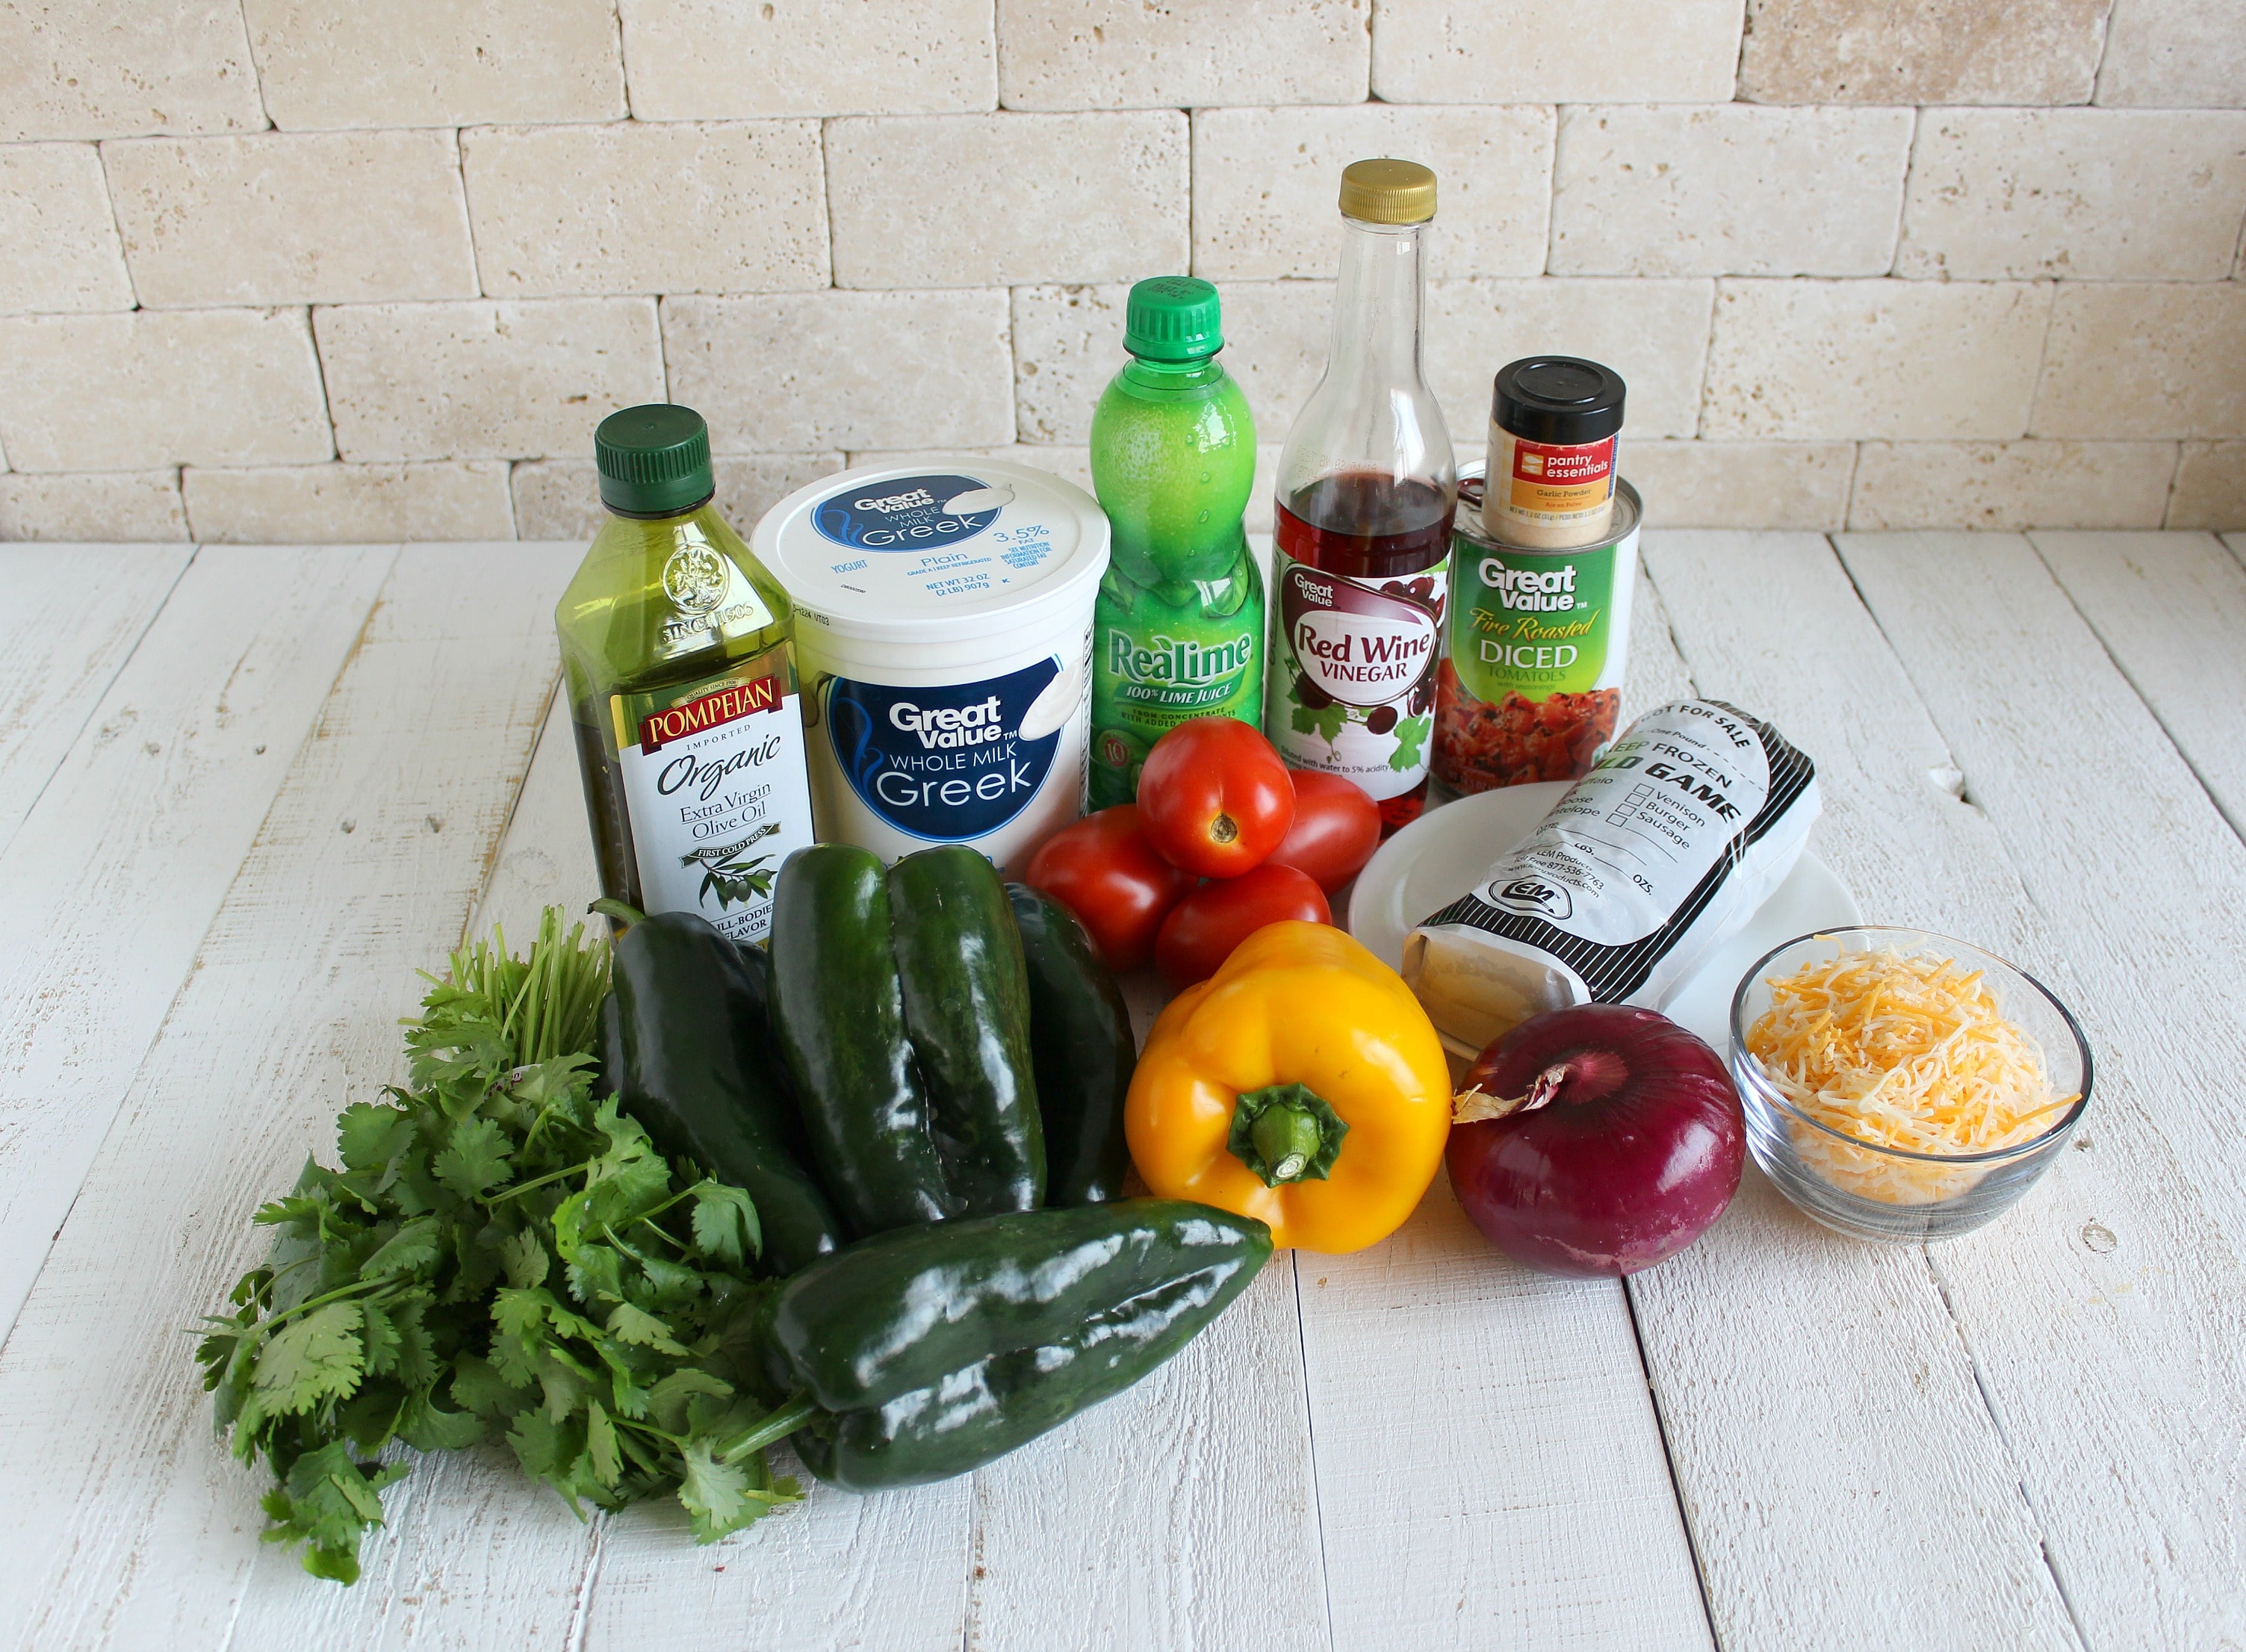 Assemble your ingredients: poblano peppers, ground meat, cheese, garlic powder, diced tomatoes, yellow bell pepper, red onion, cilantro, lime juice, olive oil, red wine vinegar and salt. 